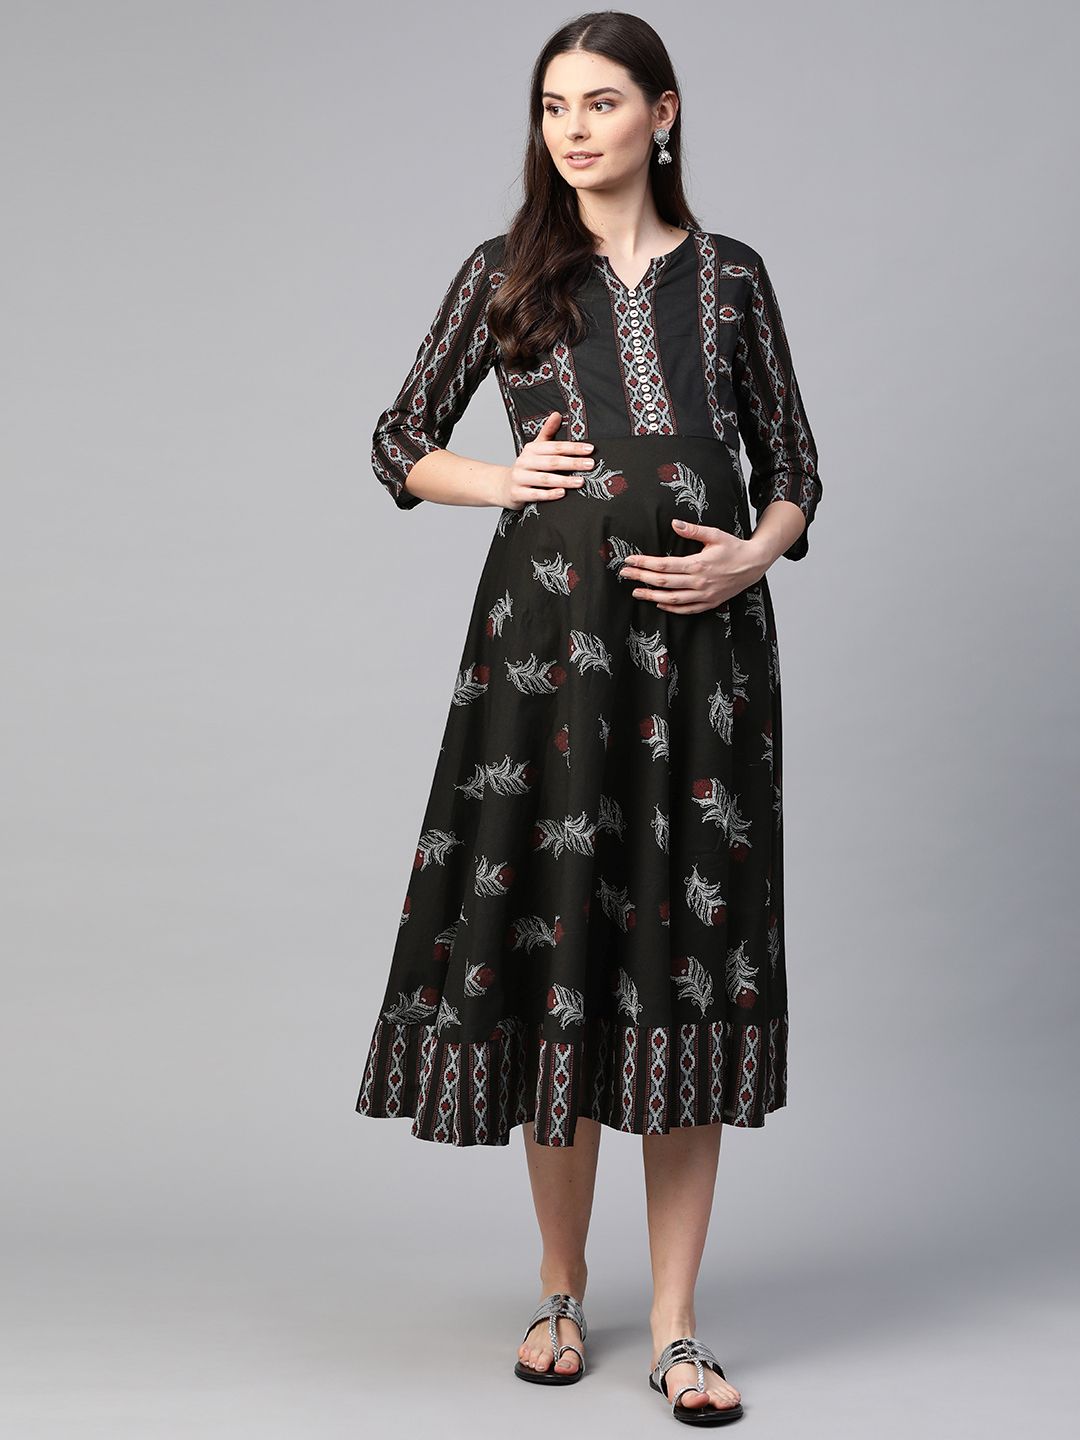 YASH GALLERY Women Black & White Cotton Printed A-Line Maternity Dress Price in India